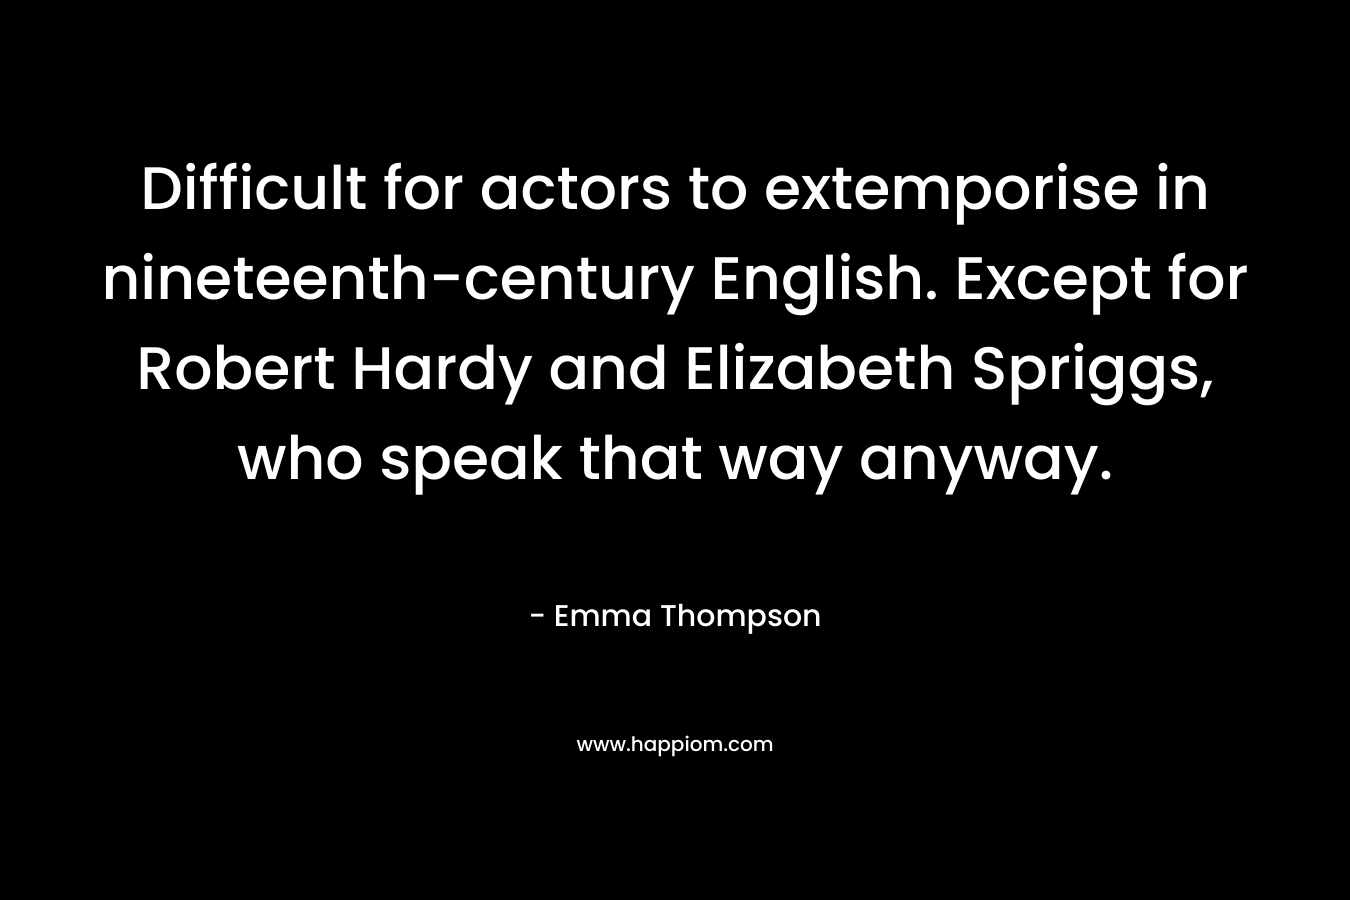 Difficult for actors to extemporise in nineteenth-century English. Except for Robert Hardy and Elizabeth Spriggs, who speak that way anyway.